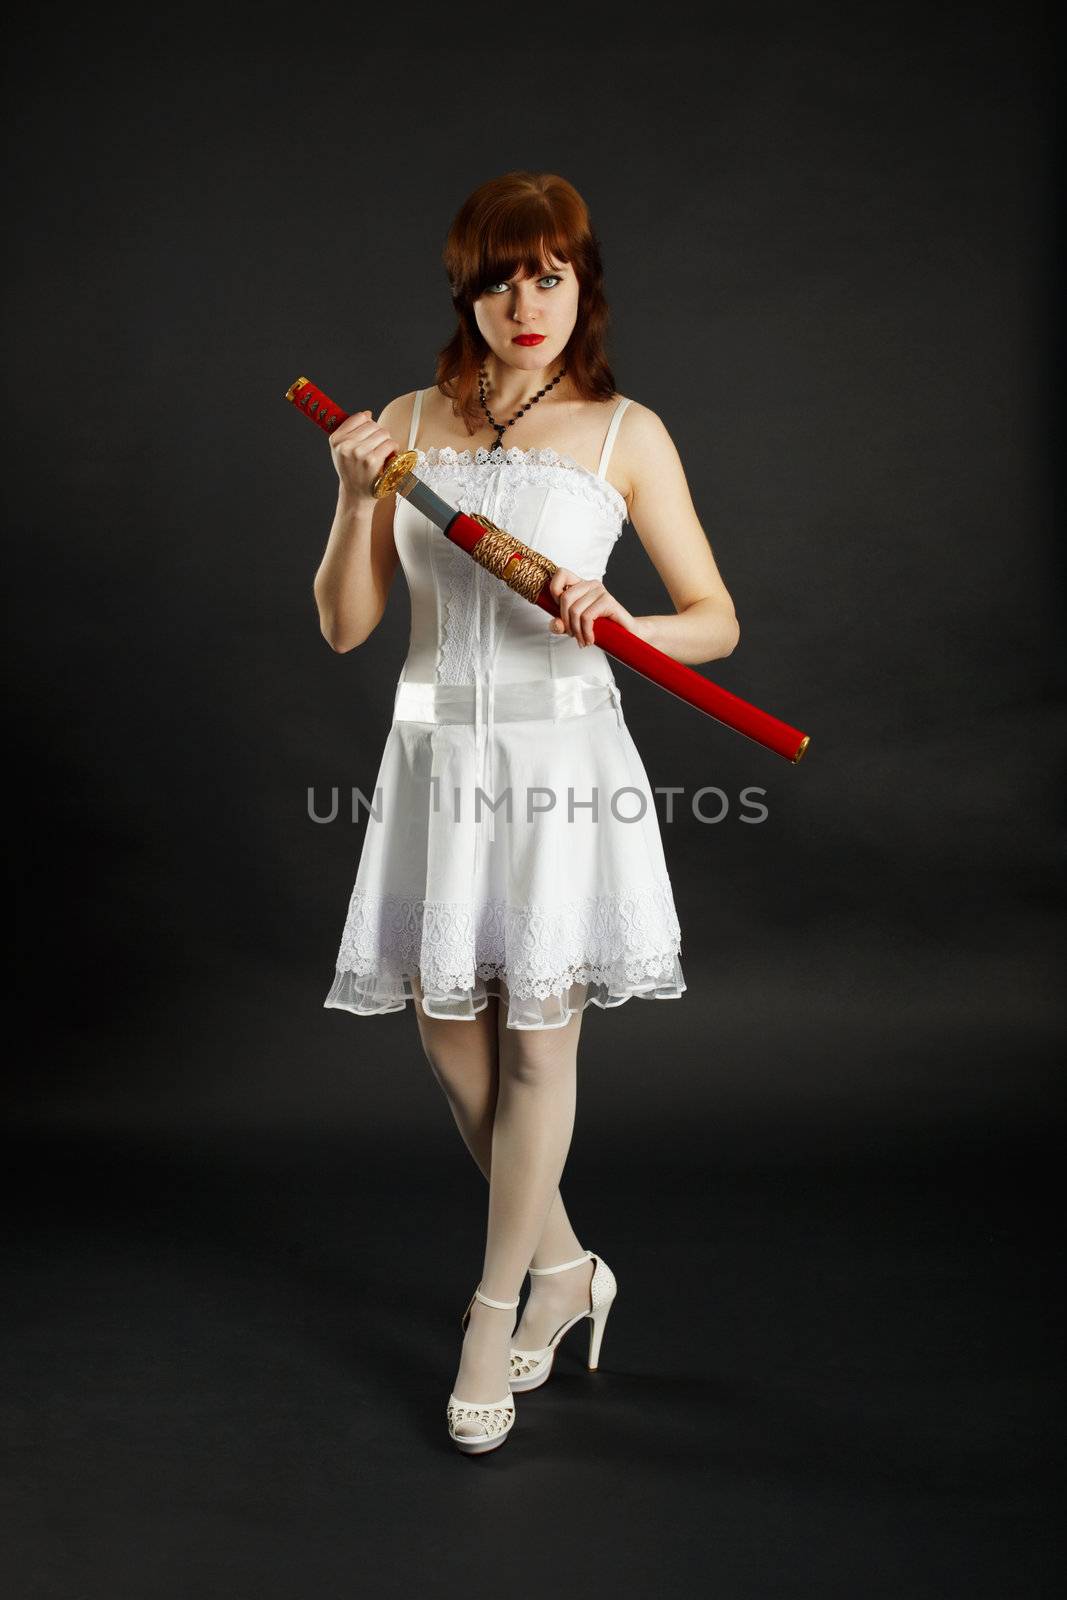 A young girl stands on a black background with a sword